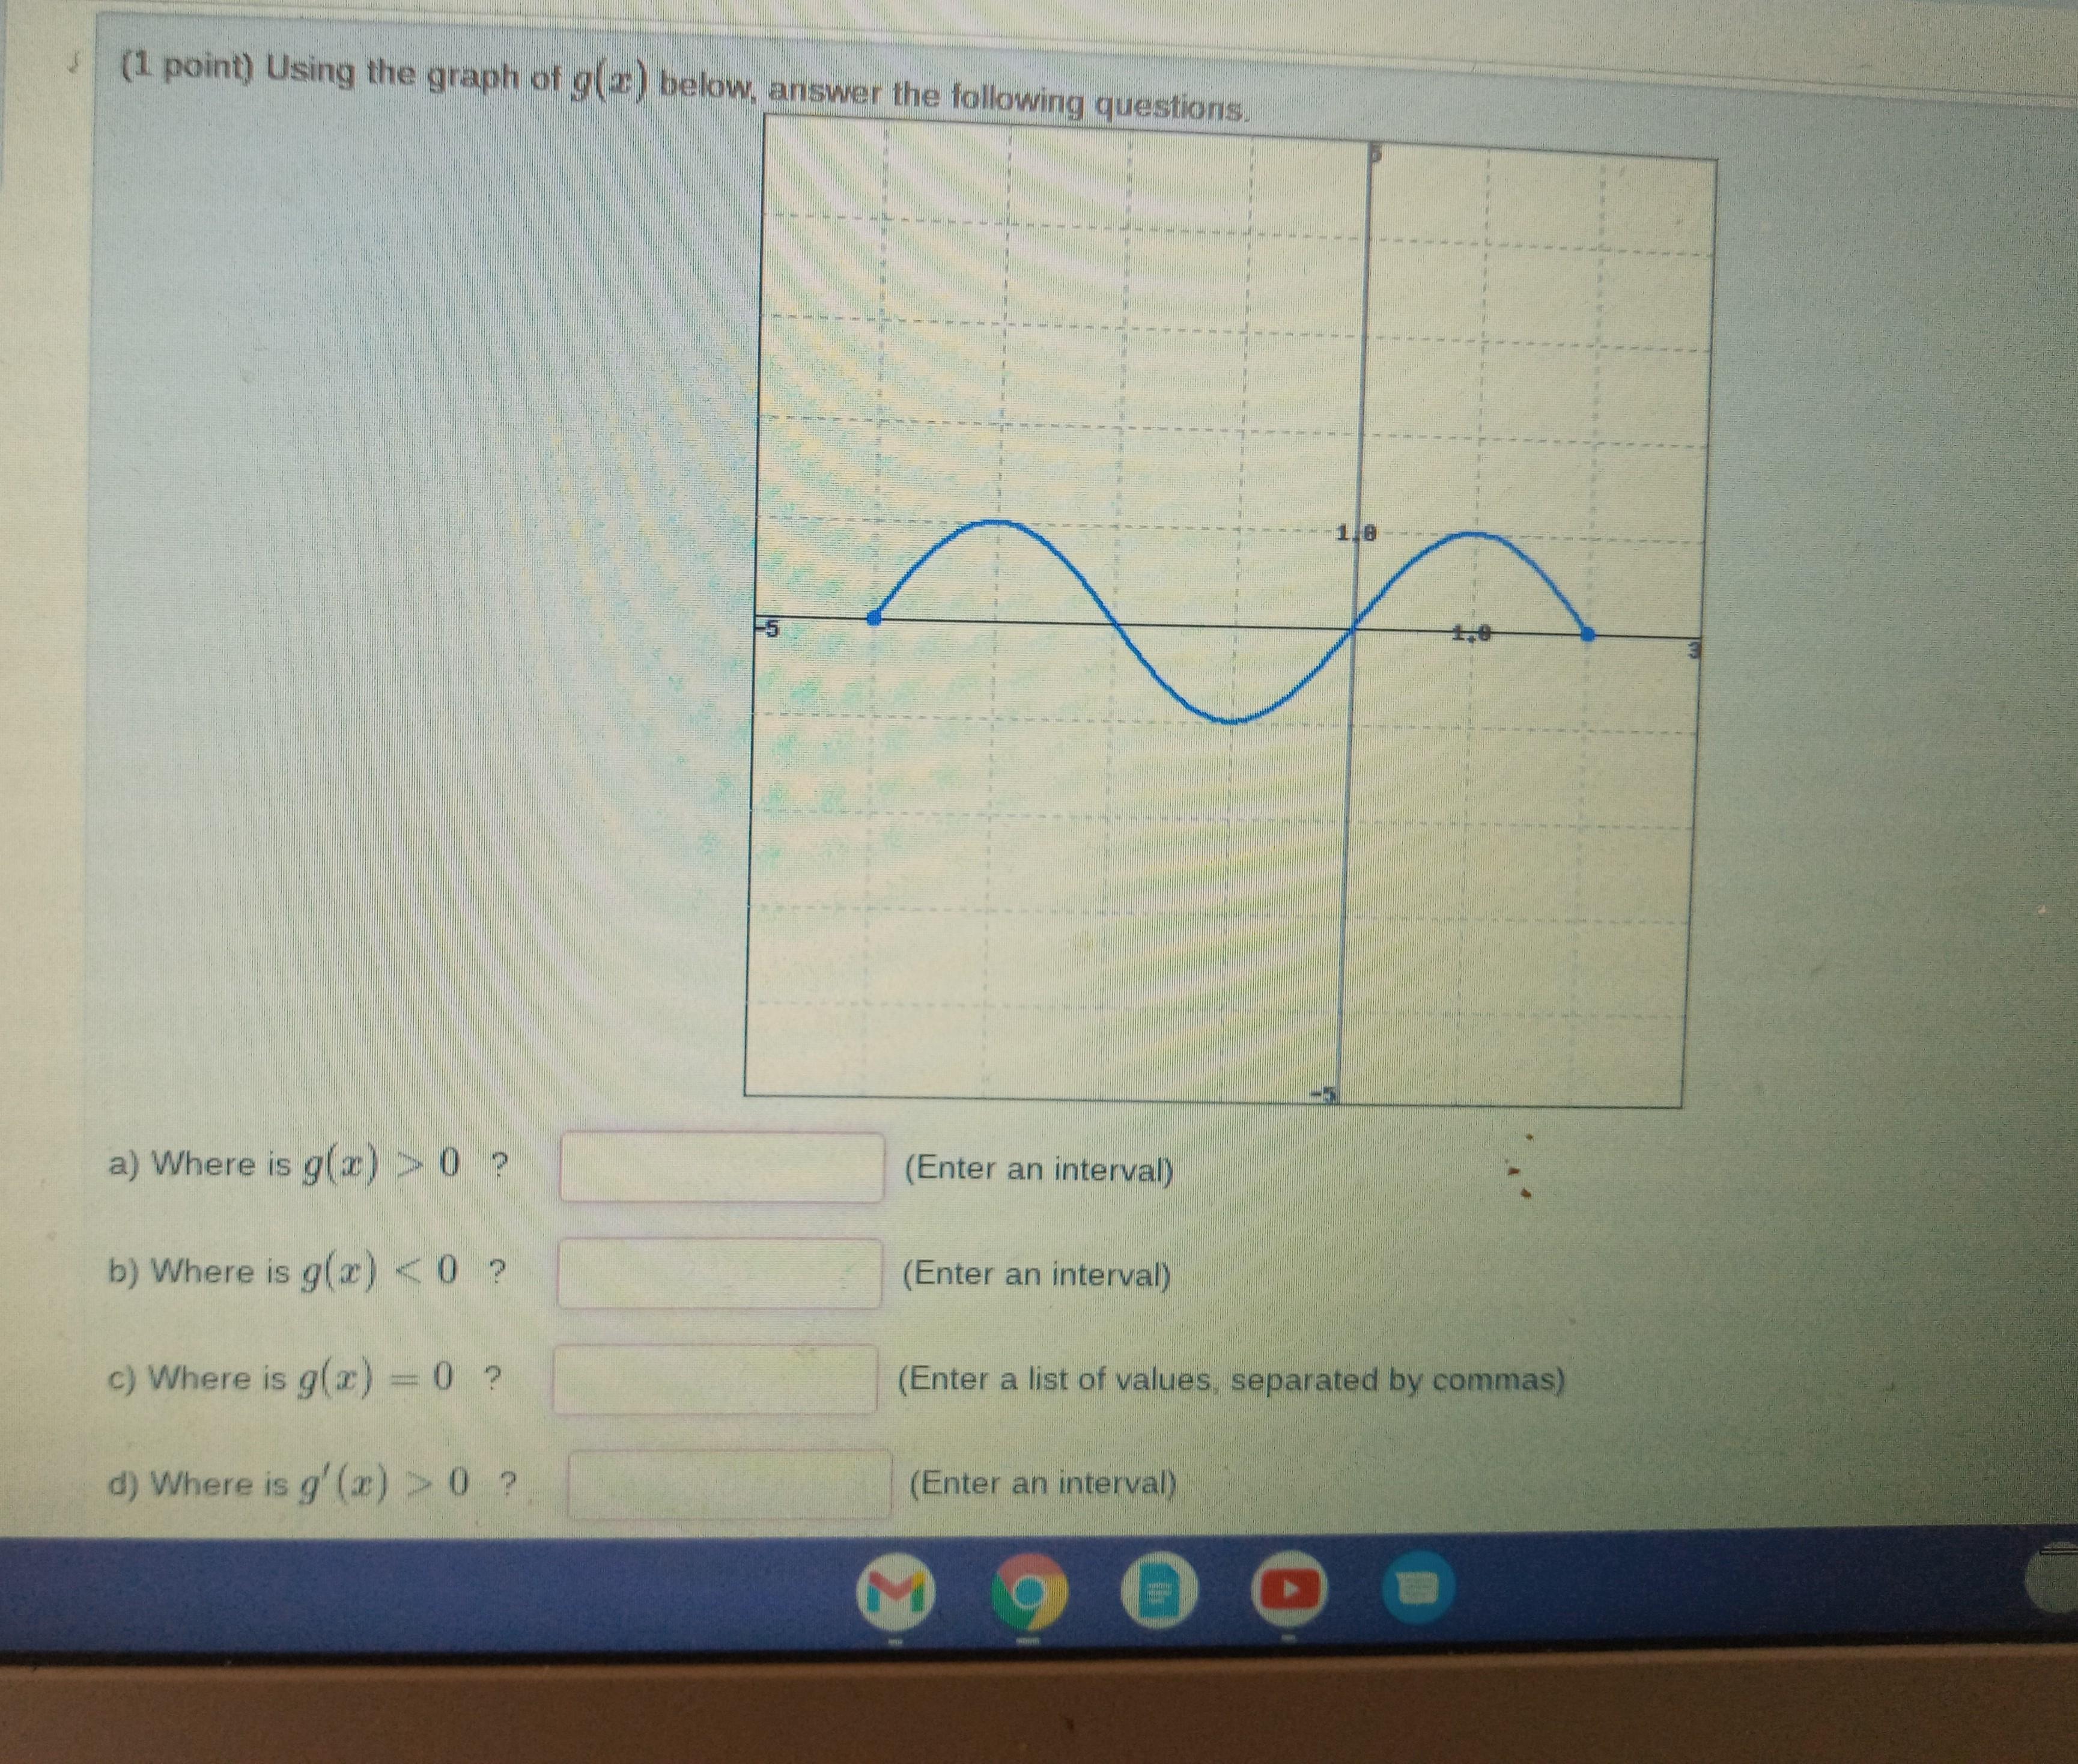 Hello, I Need Help On How To Read Attached Graph Based On The Questions.Thank You